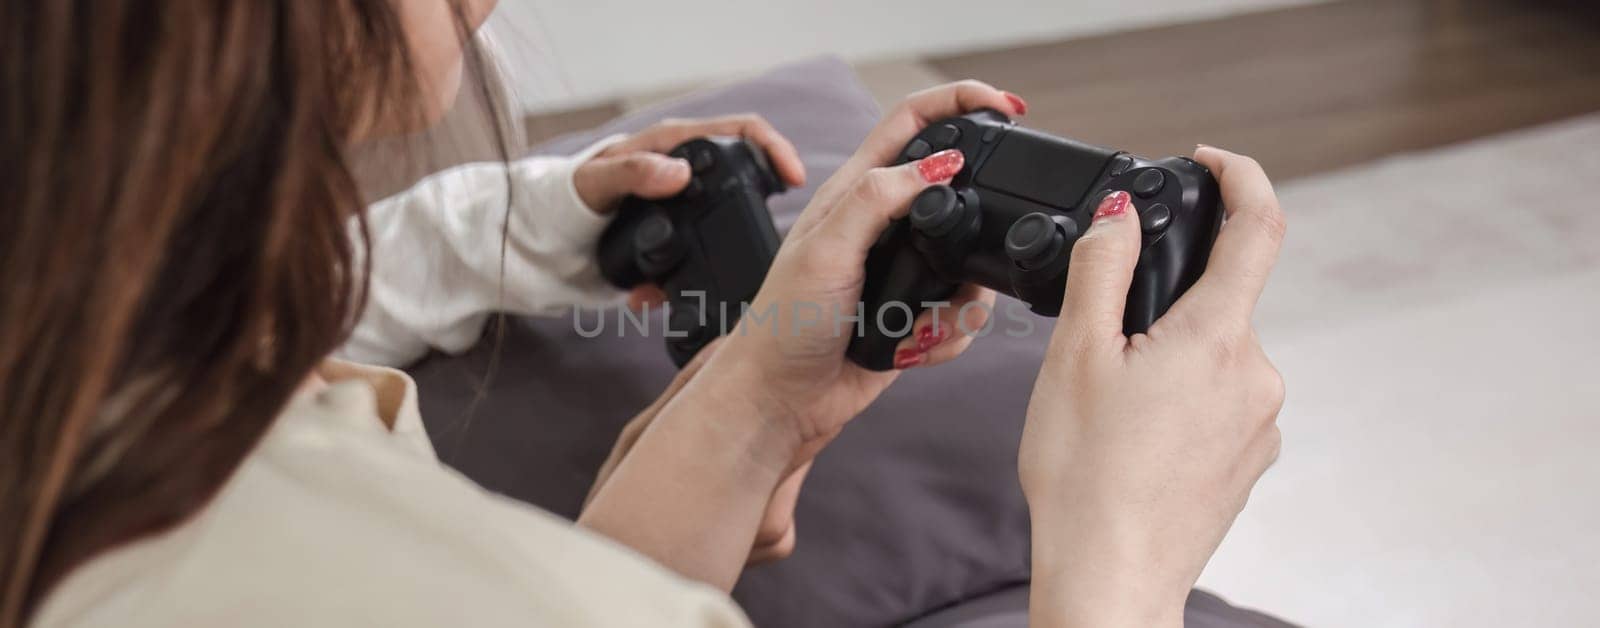 Close-up of the women couple enjoying playing video games with a console gamepad in their hands..